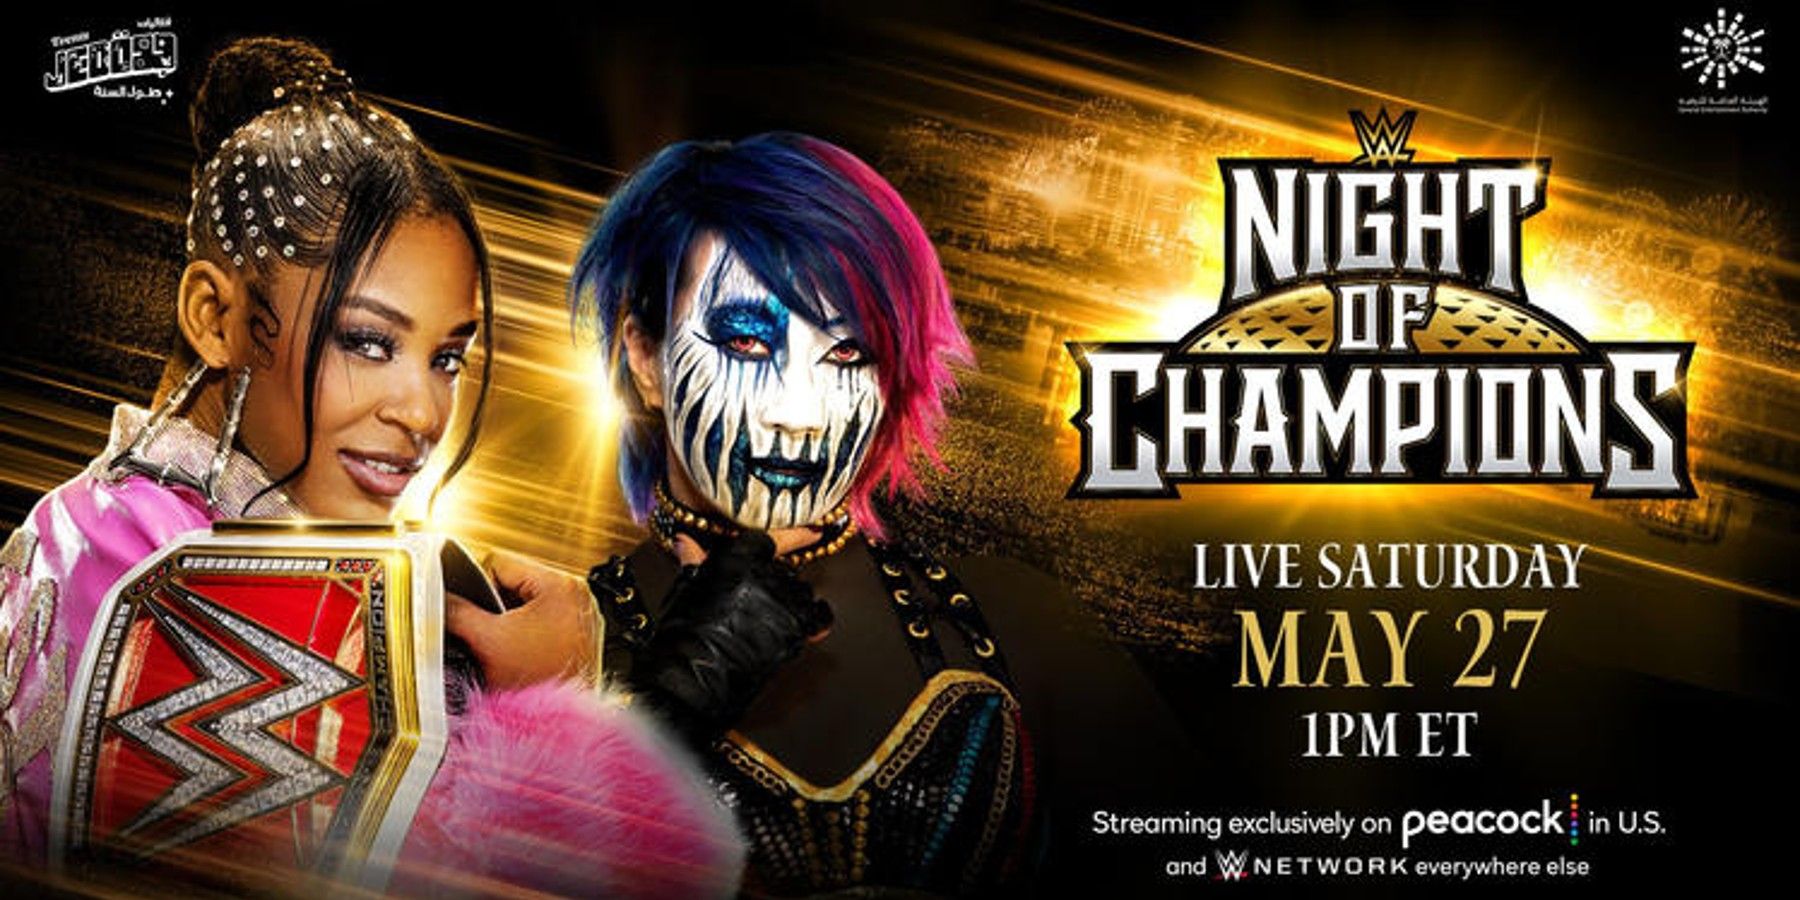 Bianca Belair and Asuka Night of Champions 2023 graphic for the Raw Women's Championship